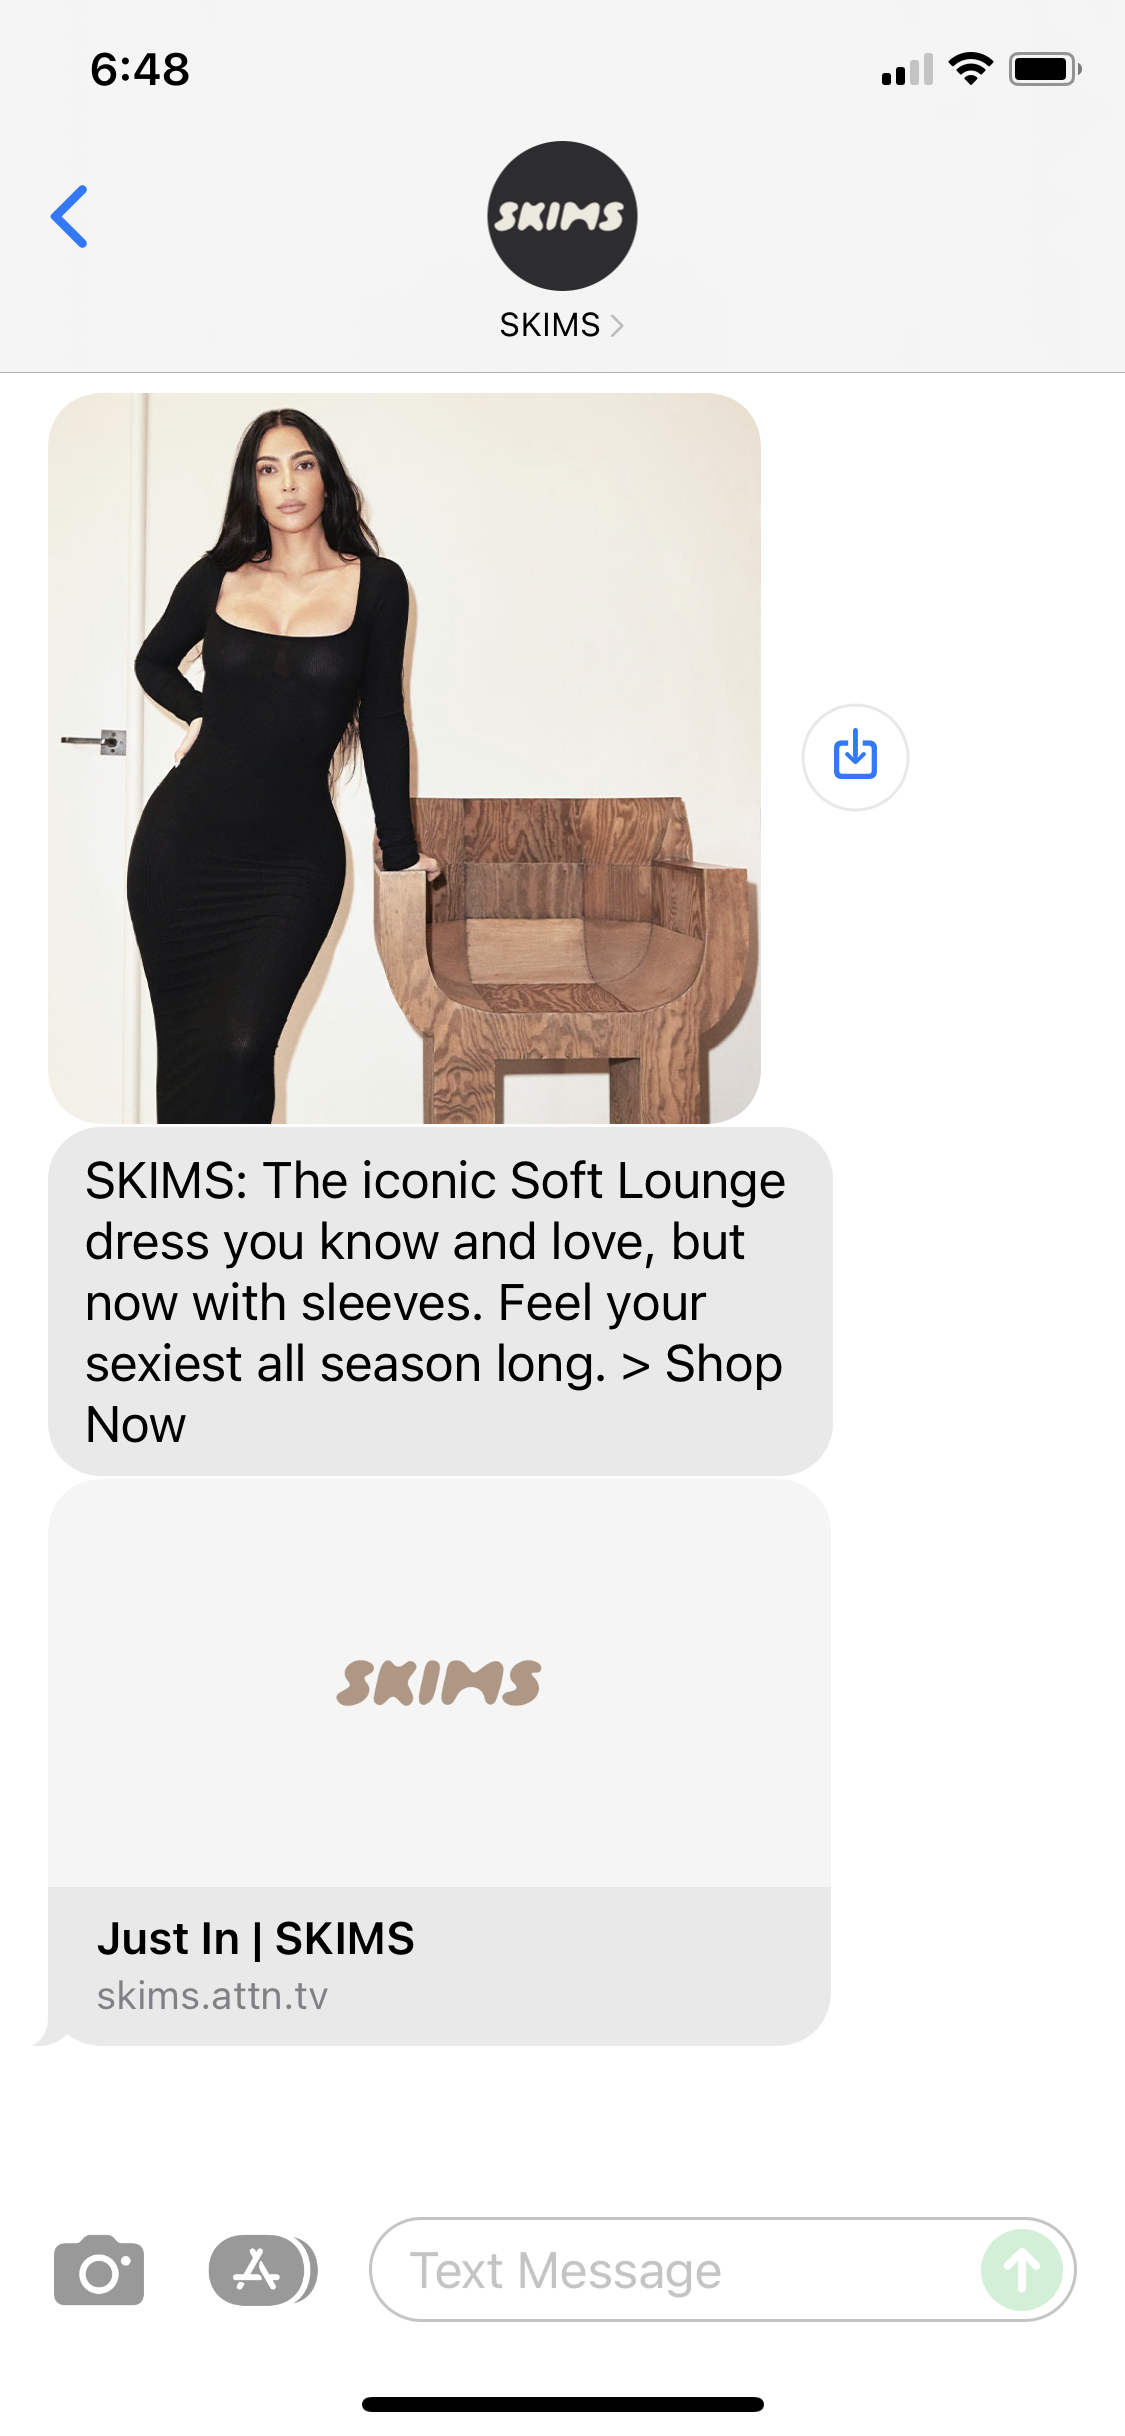 SKIMS Text Message Marketing Example – 07.29.2021